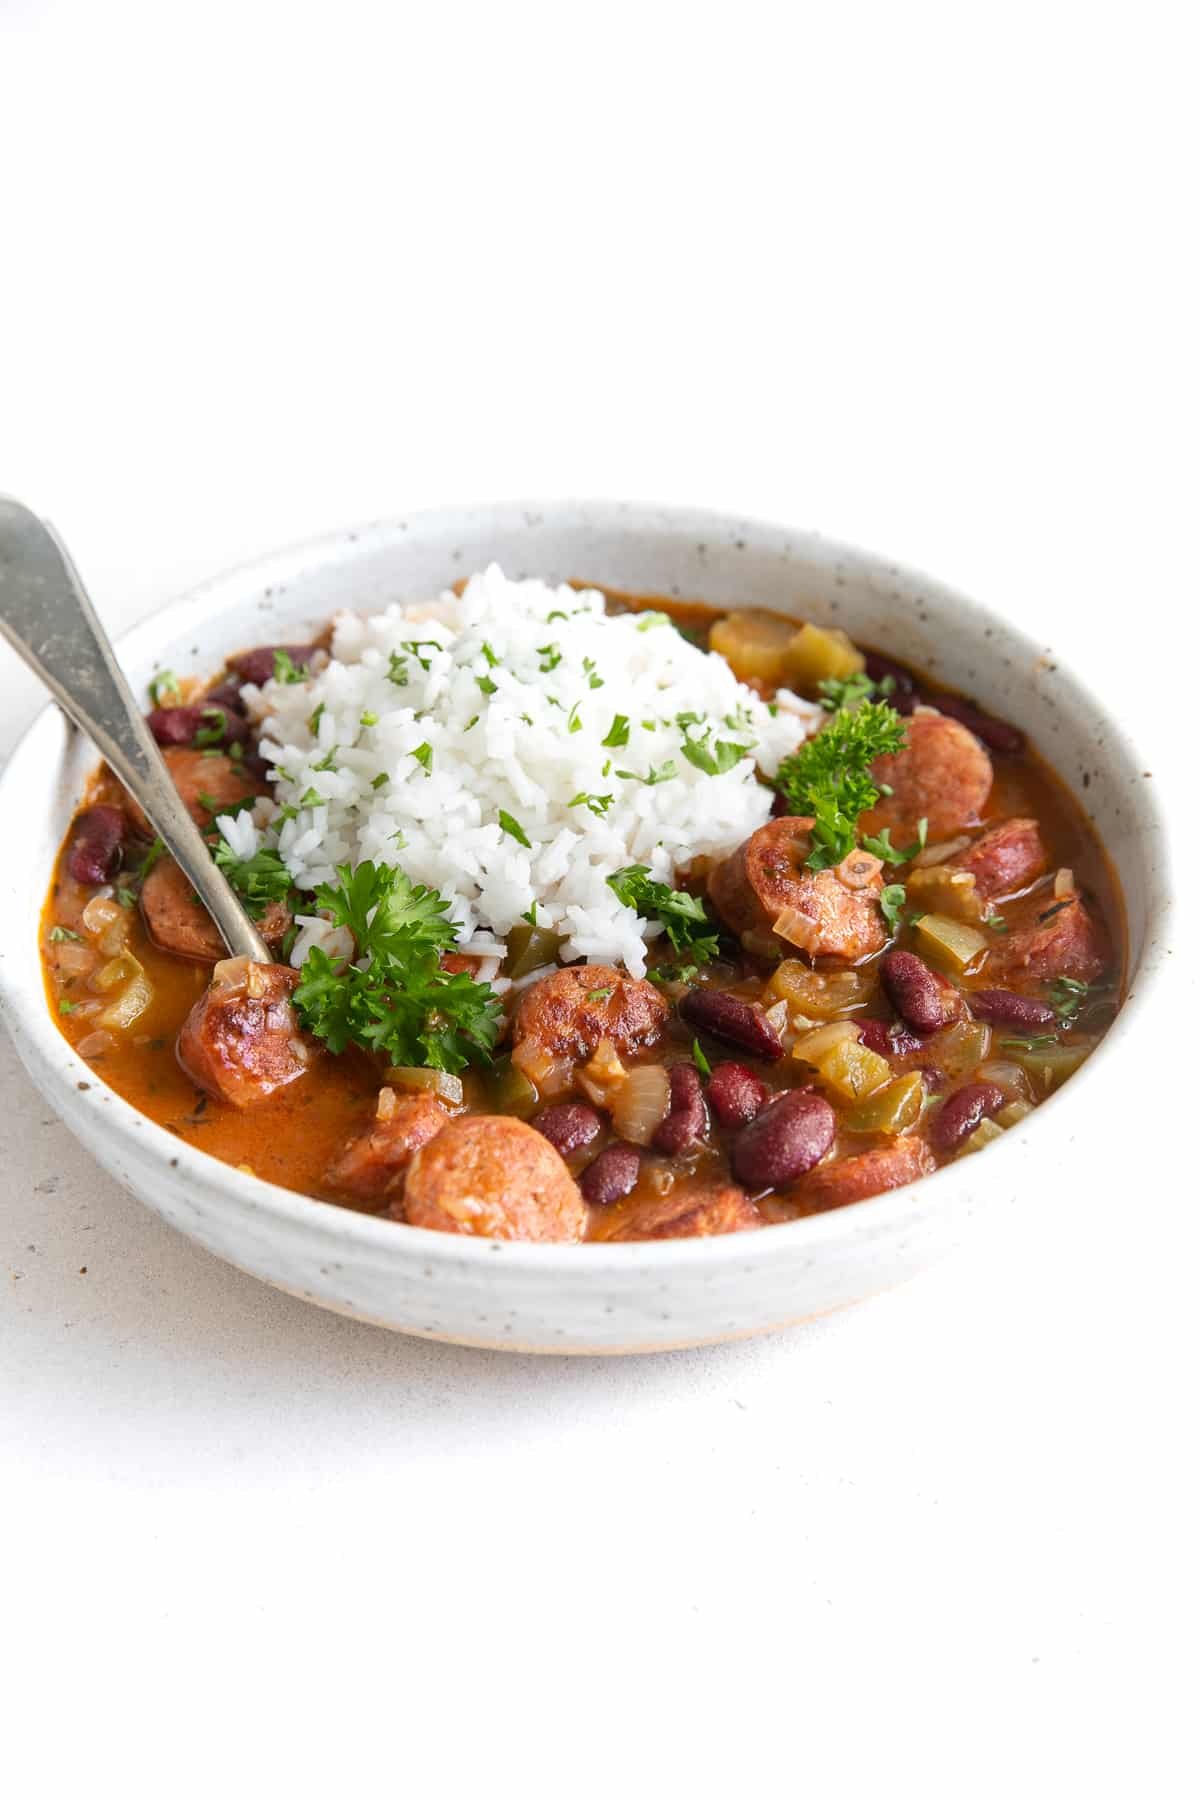 White shallow bowl filled with cooked red beans, andouille sausage, and topped with white rice.